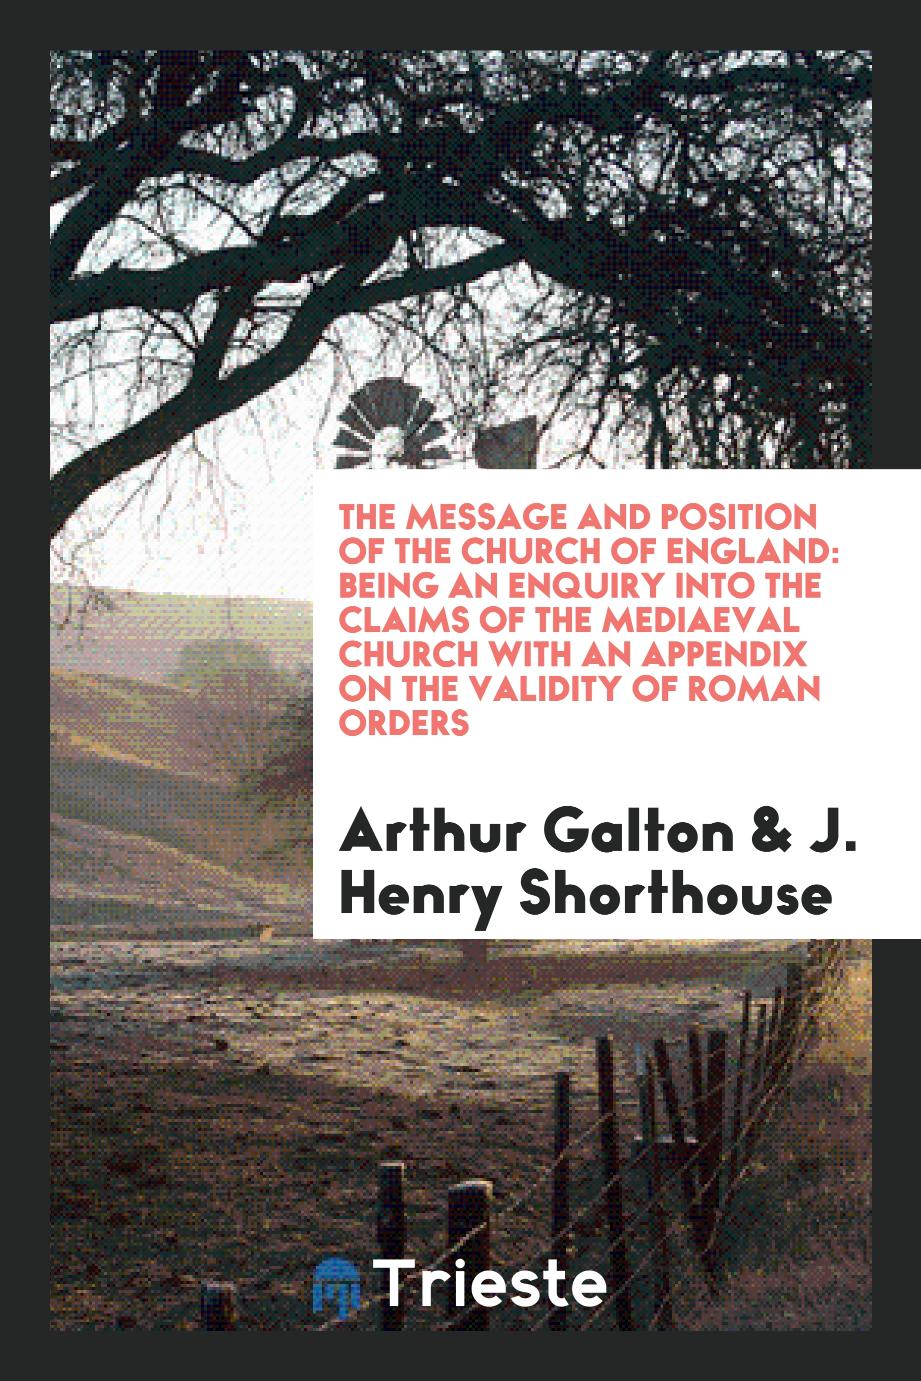 The message and position of the Church of England: being an enquiry into the claims of the mediaeval church with an appendix on the validity of Roman Orders